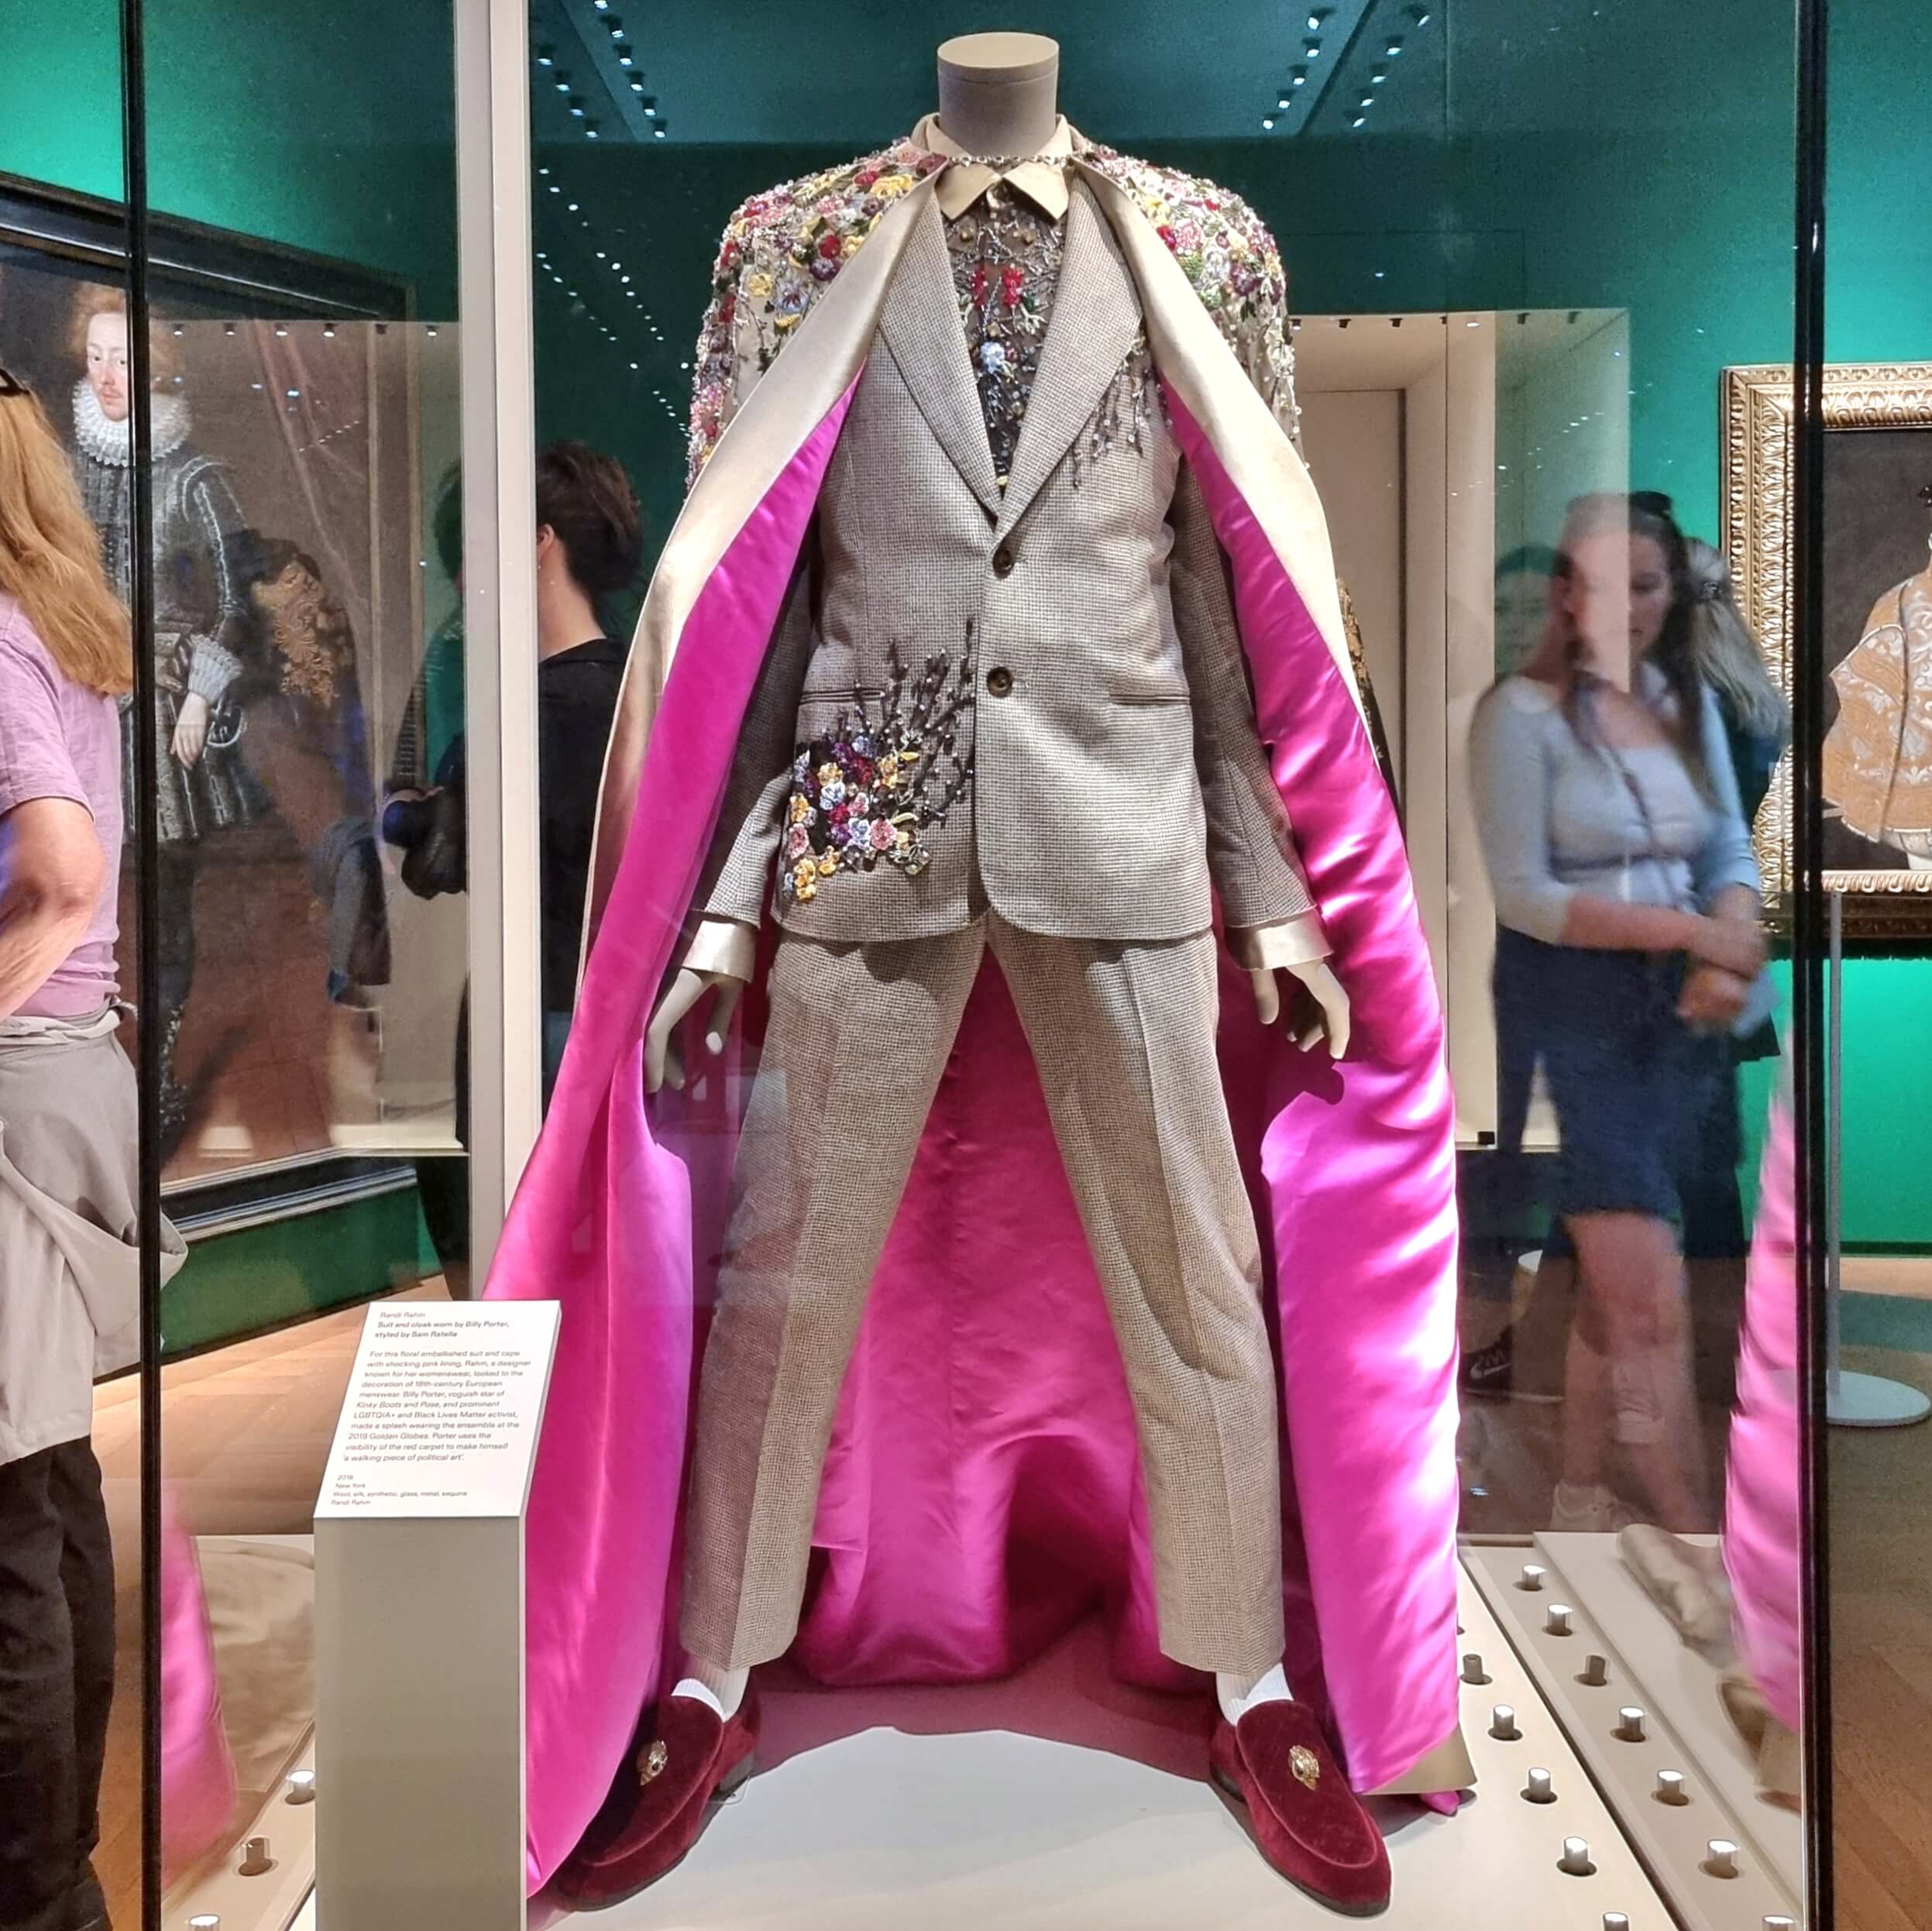 "Fashioning Masculinities. The Art of Menswear" at the V&A Museum, London / Look by Randi Rahm, worn by Billy Porter, styled by Sam Ratelle / 2018 / Exhibition View / 2022